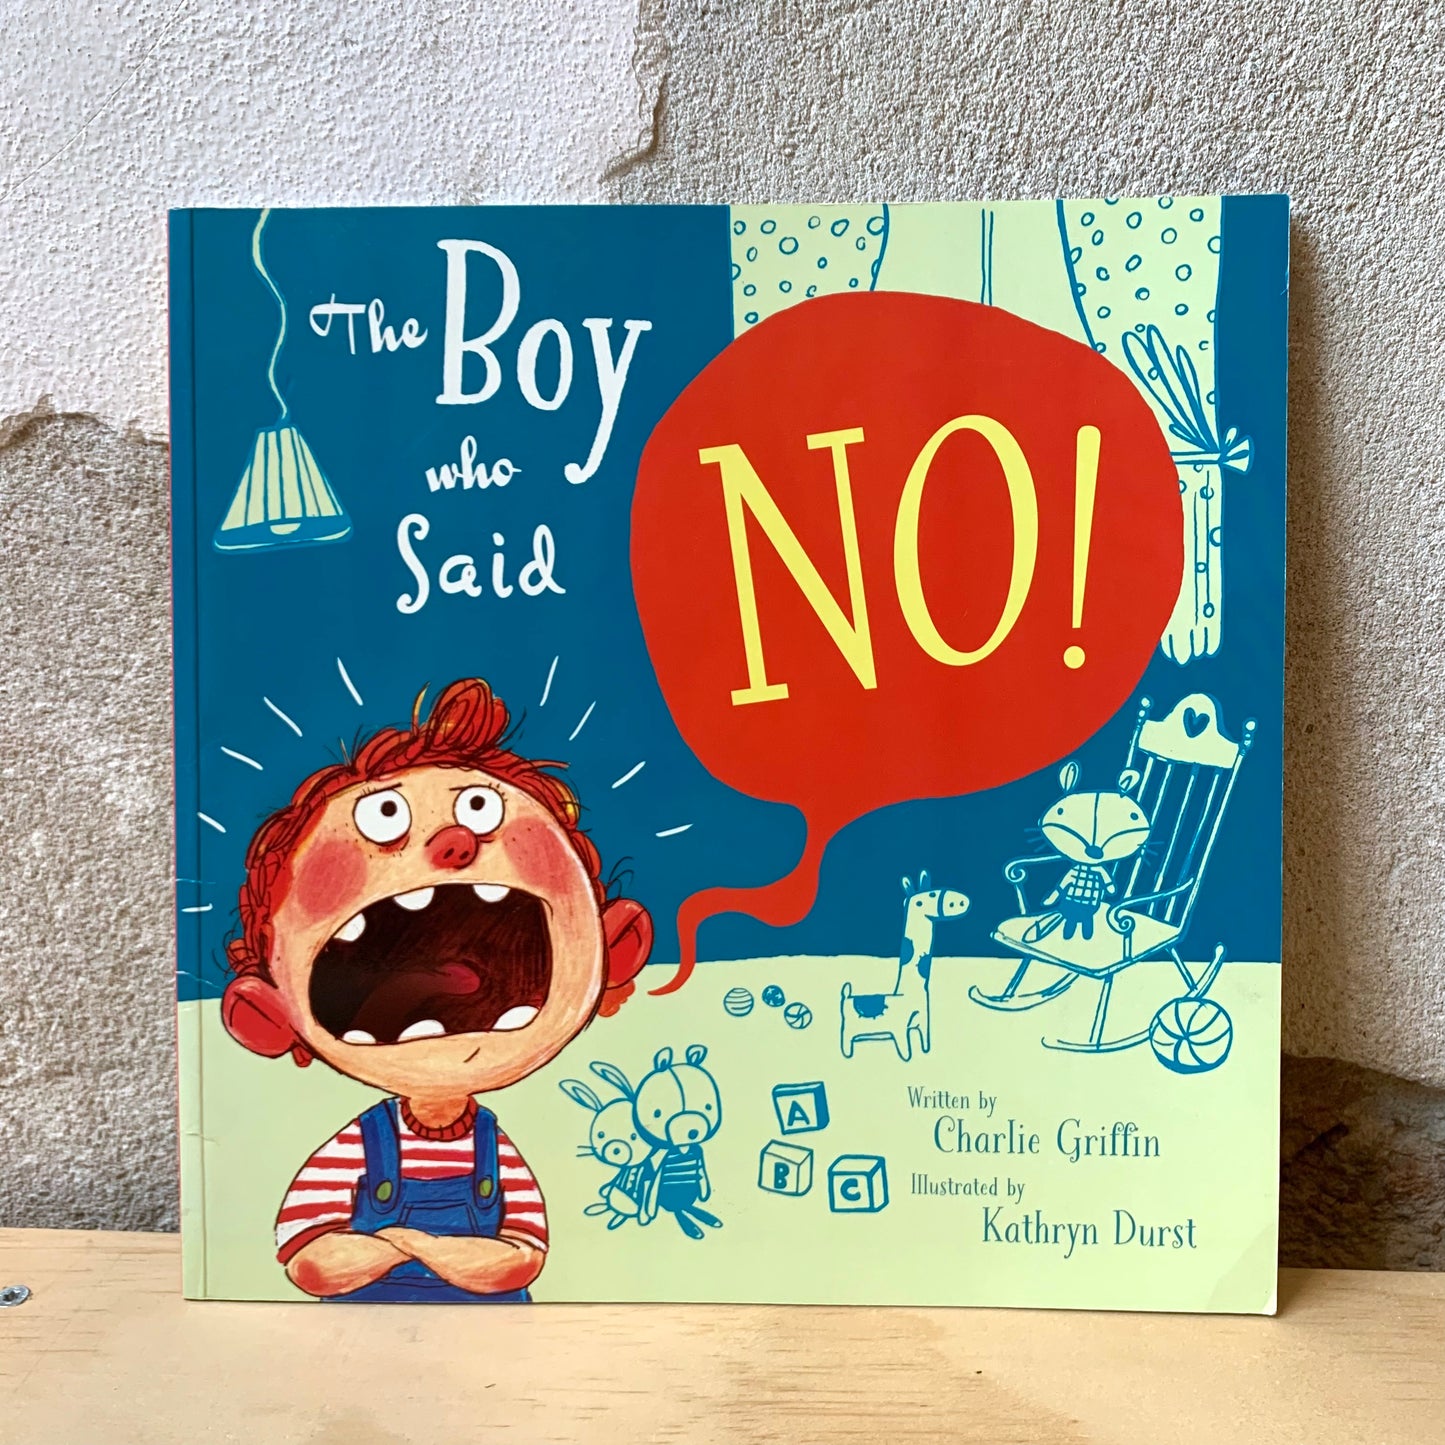 The Boy Who Said No! – Charlie Griffin